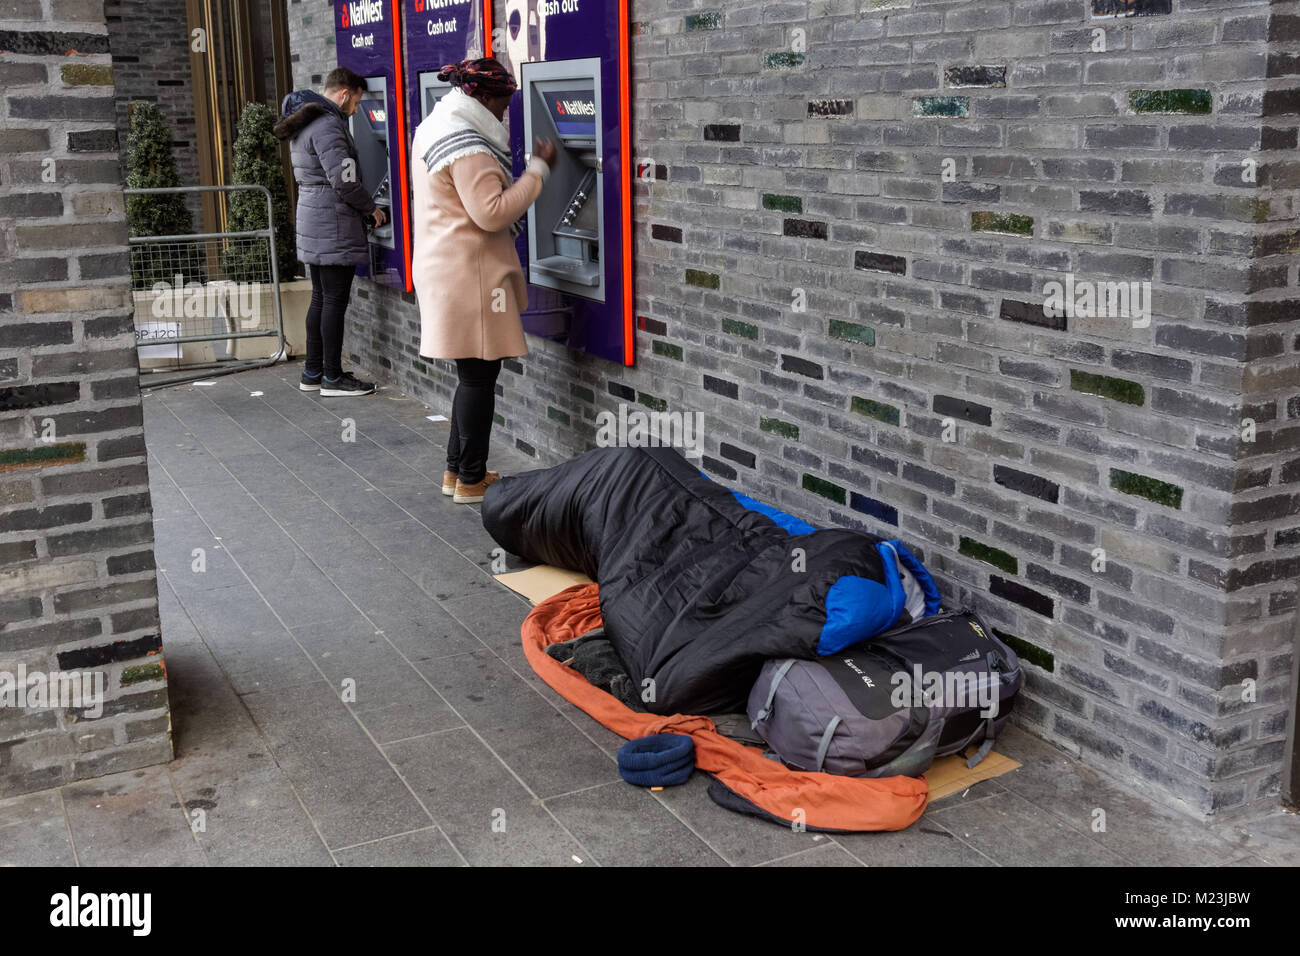 Person sleeping rough next to Natwest ATM cash machines in London, England, United Kingdom, UK Stock Photo